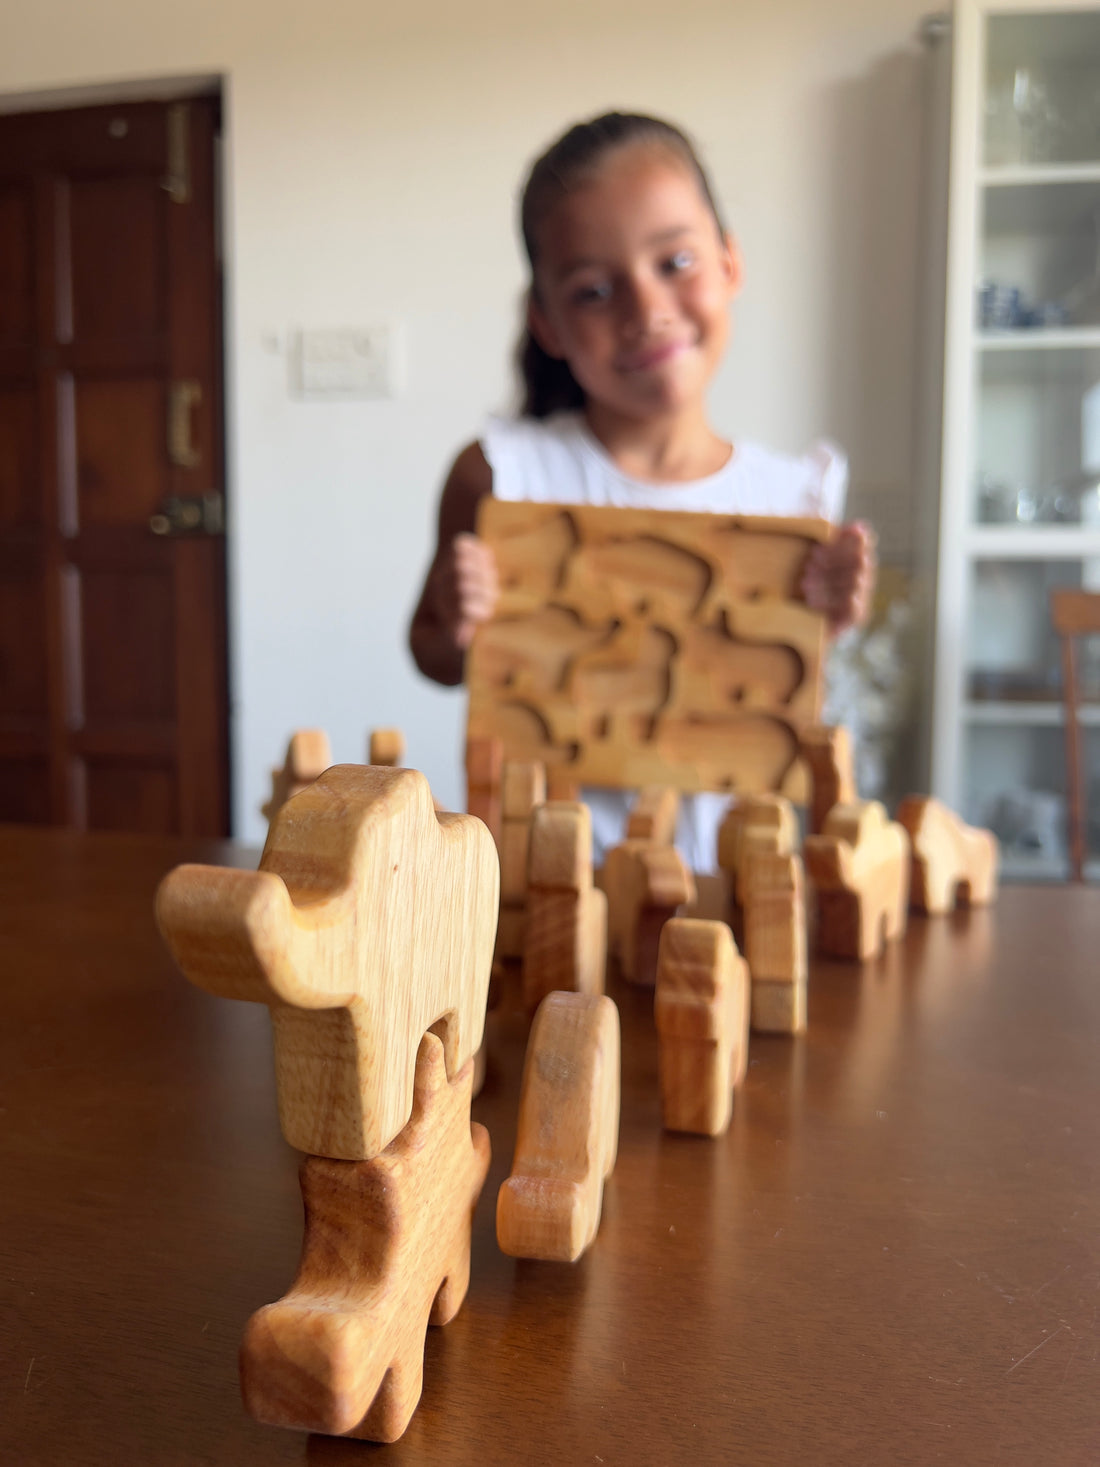 5 Wooden Toy Gift Ideas for Toddlers